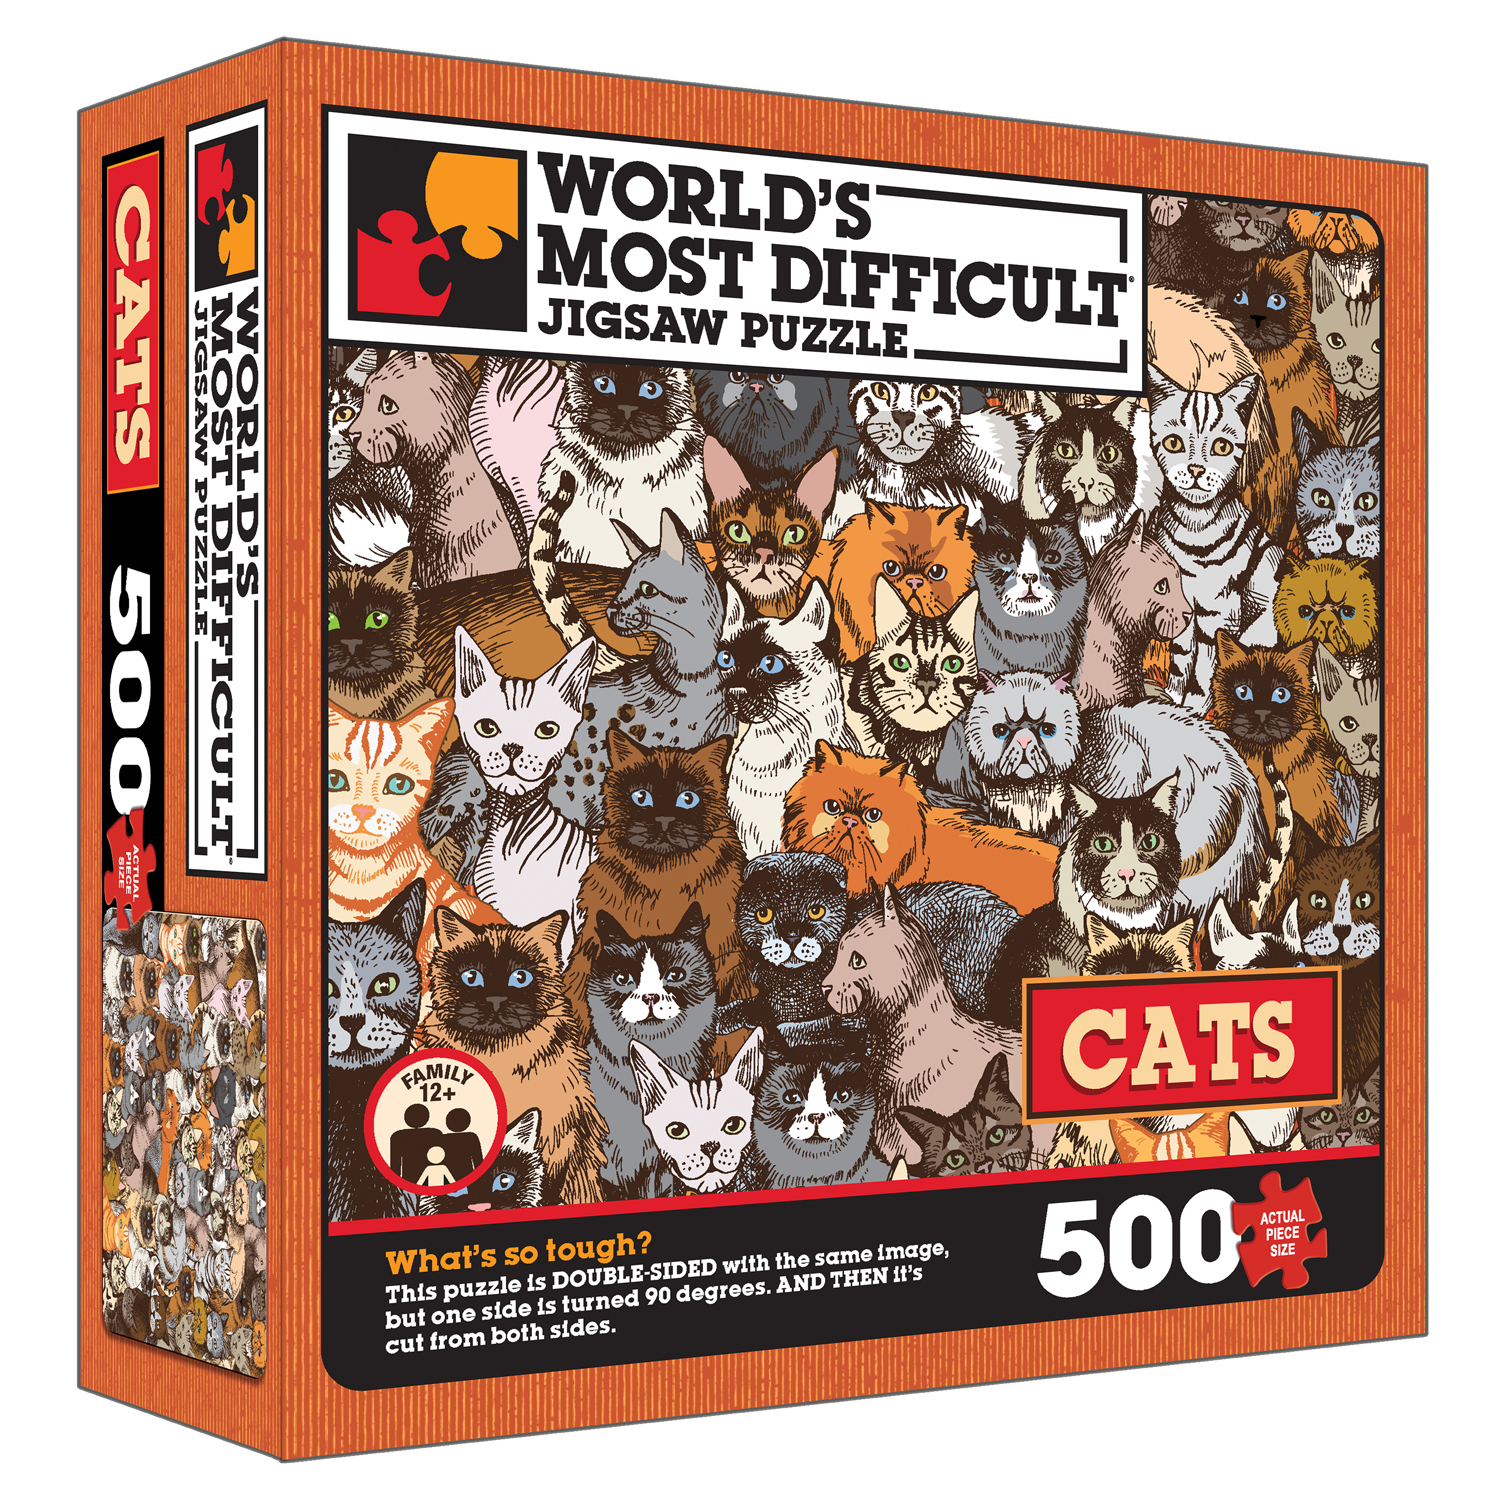 World's Most Difficult Jigsaw Puzzle - Cats